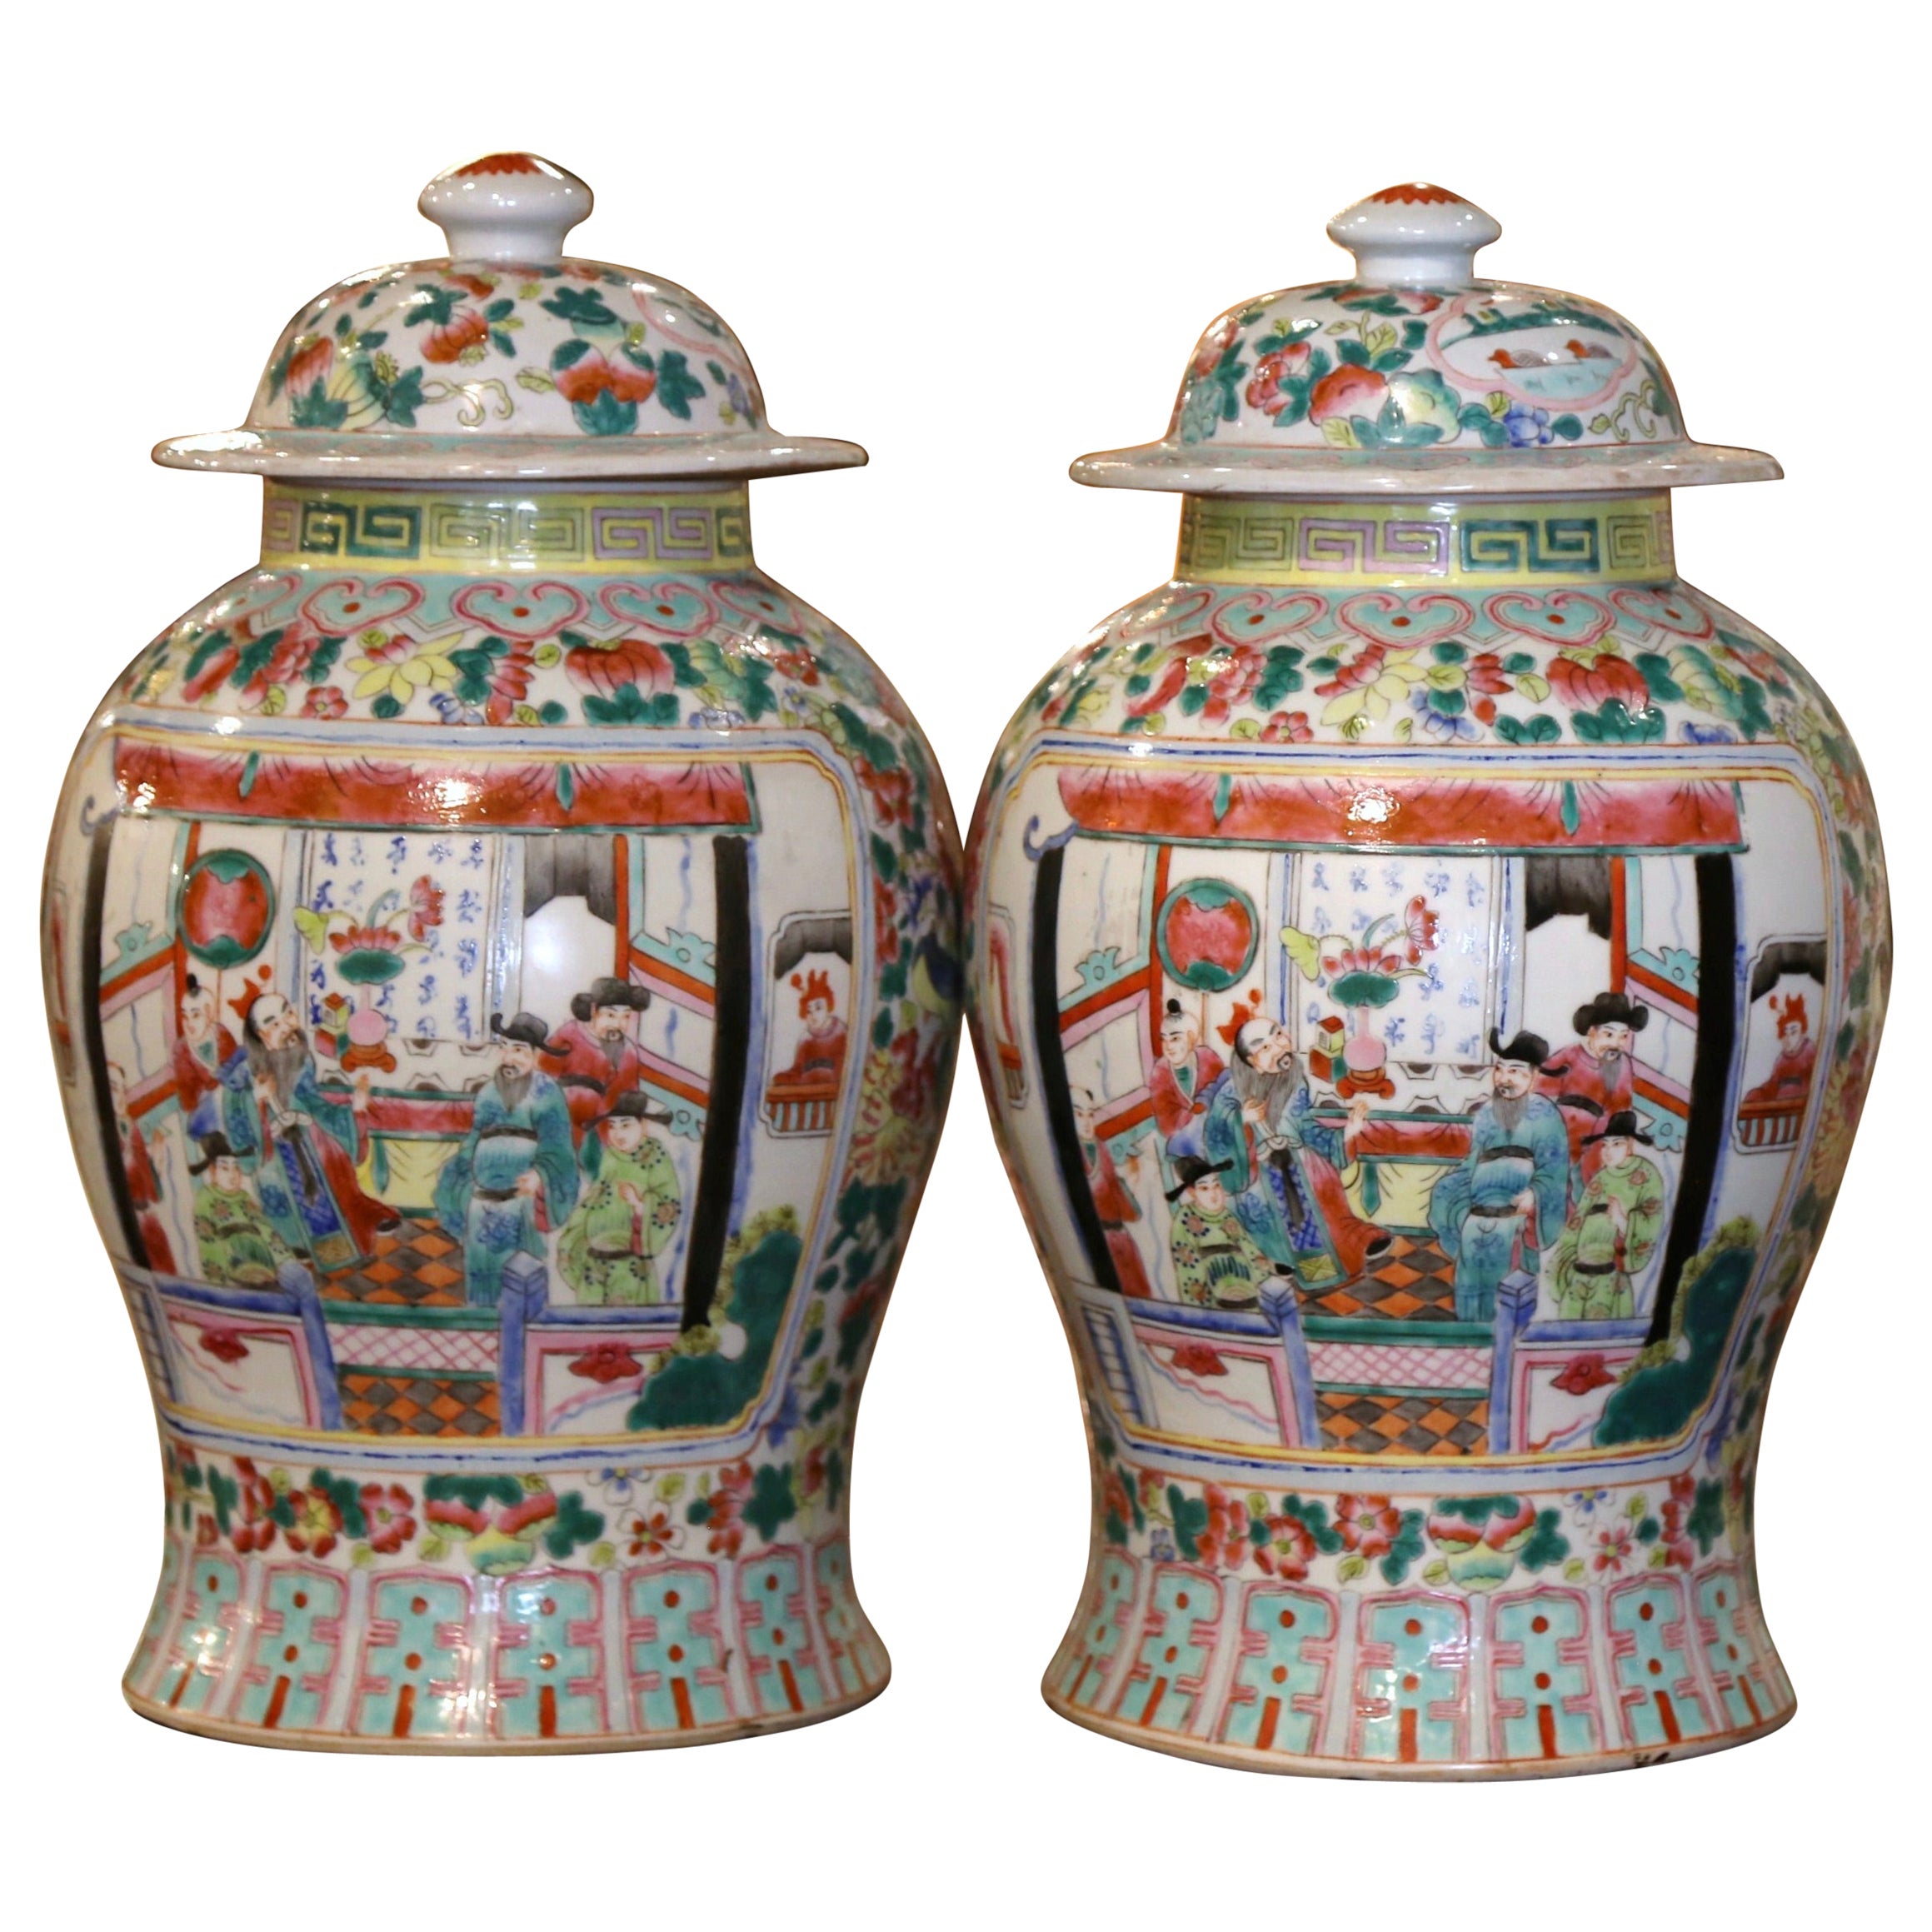 Pair of Early 20th Century Chinese Painted Famille Rose Porcelain Lidded Jars